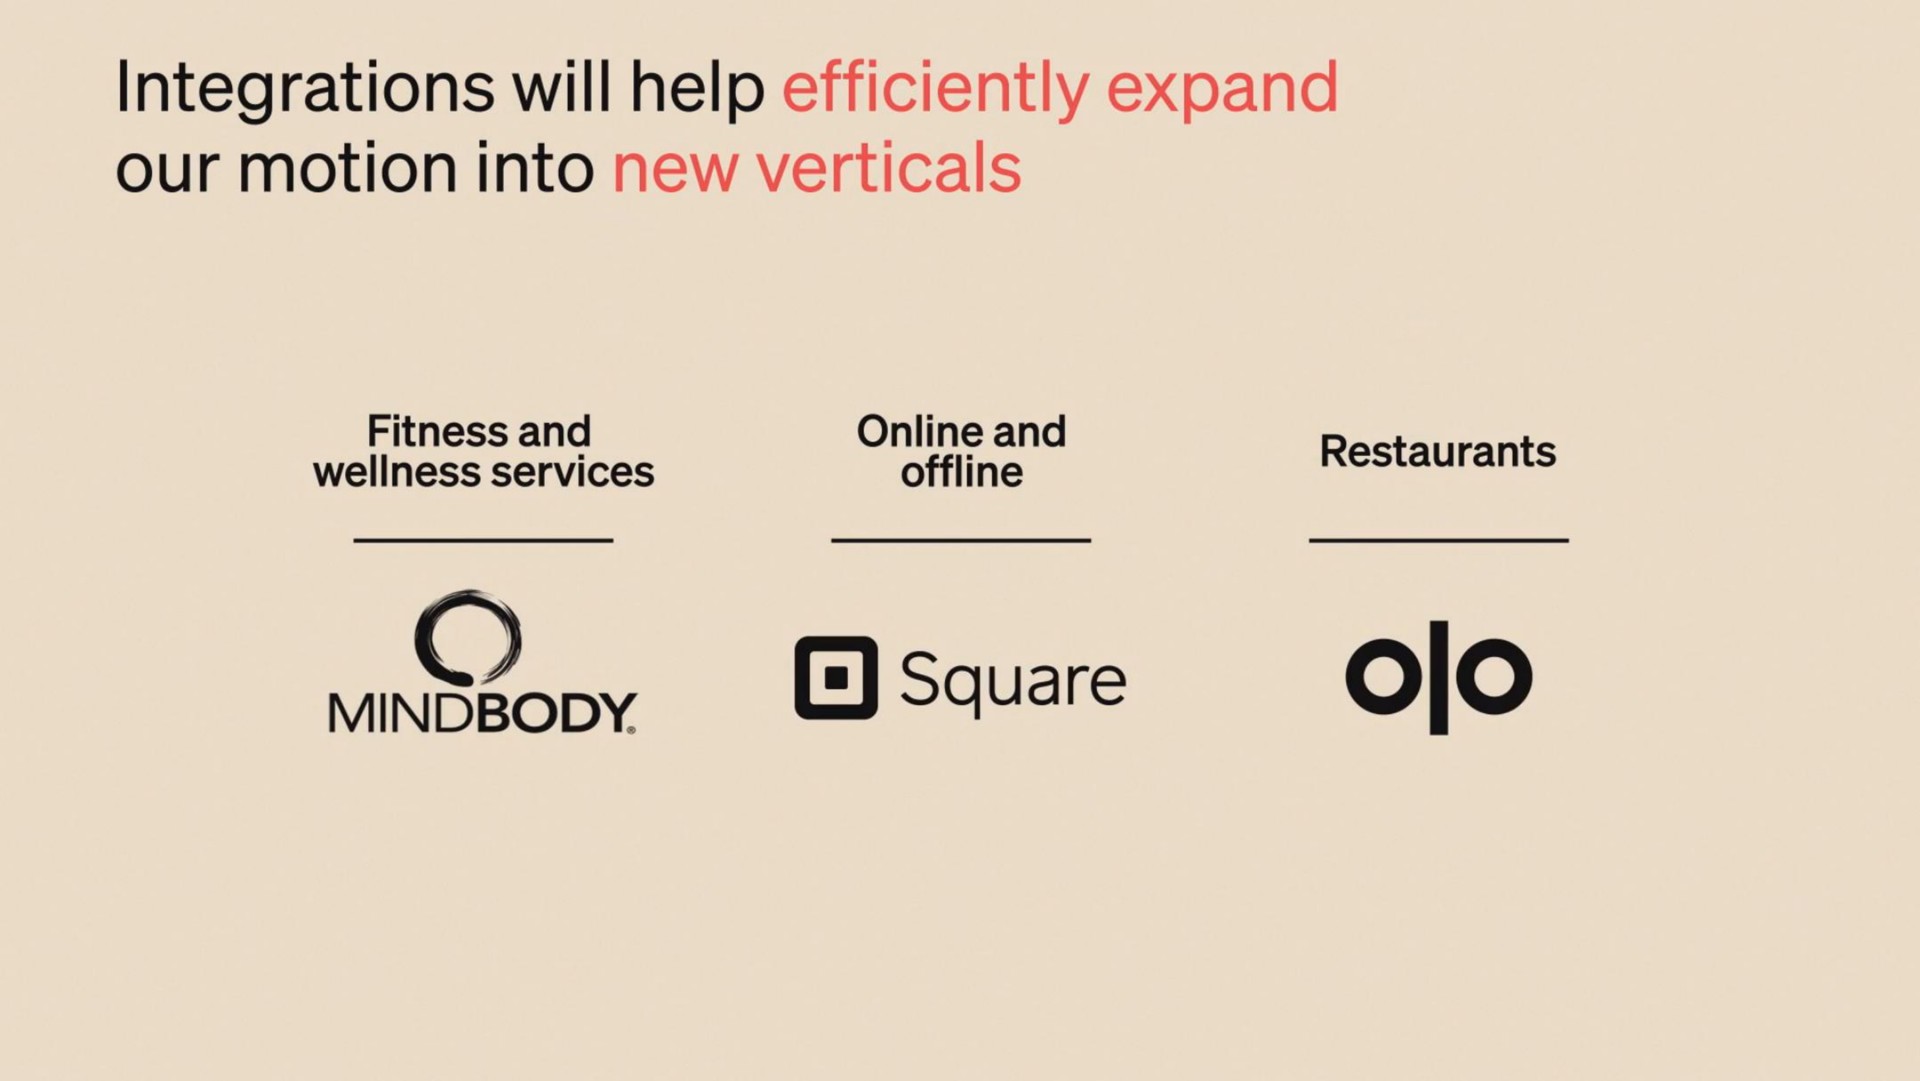 integrations will help efficiently expand our motion into new verticals fitness and wellness services and restaurants mean square | Klaviyo